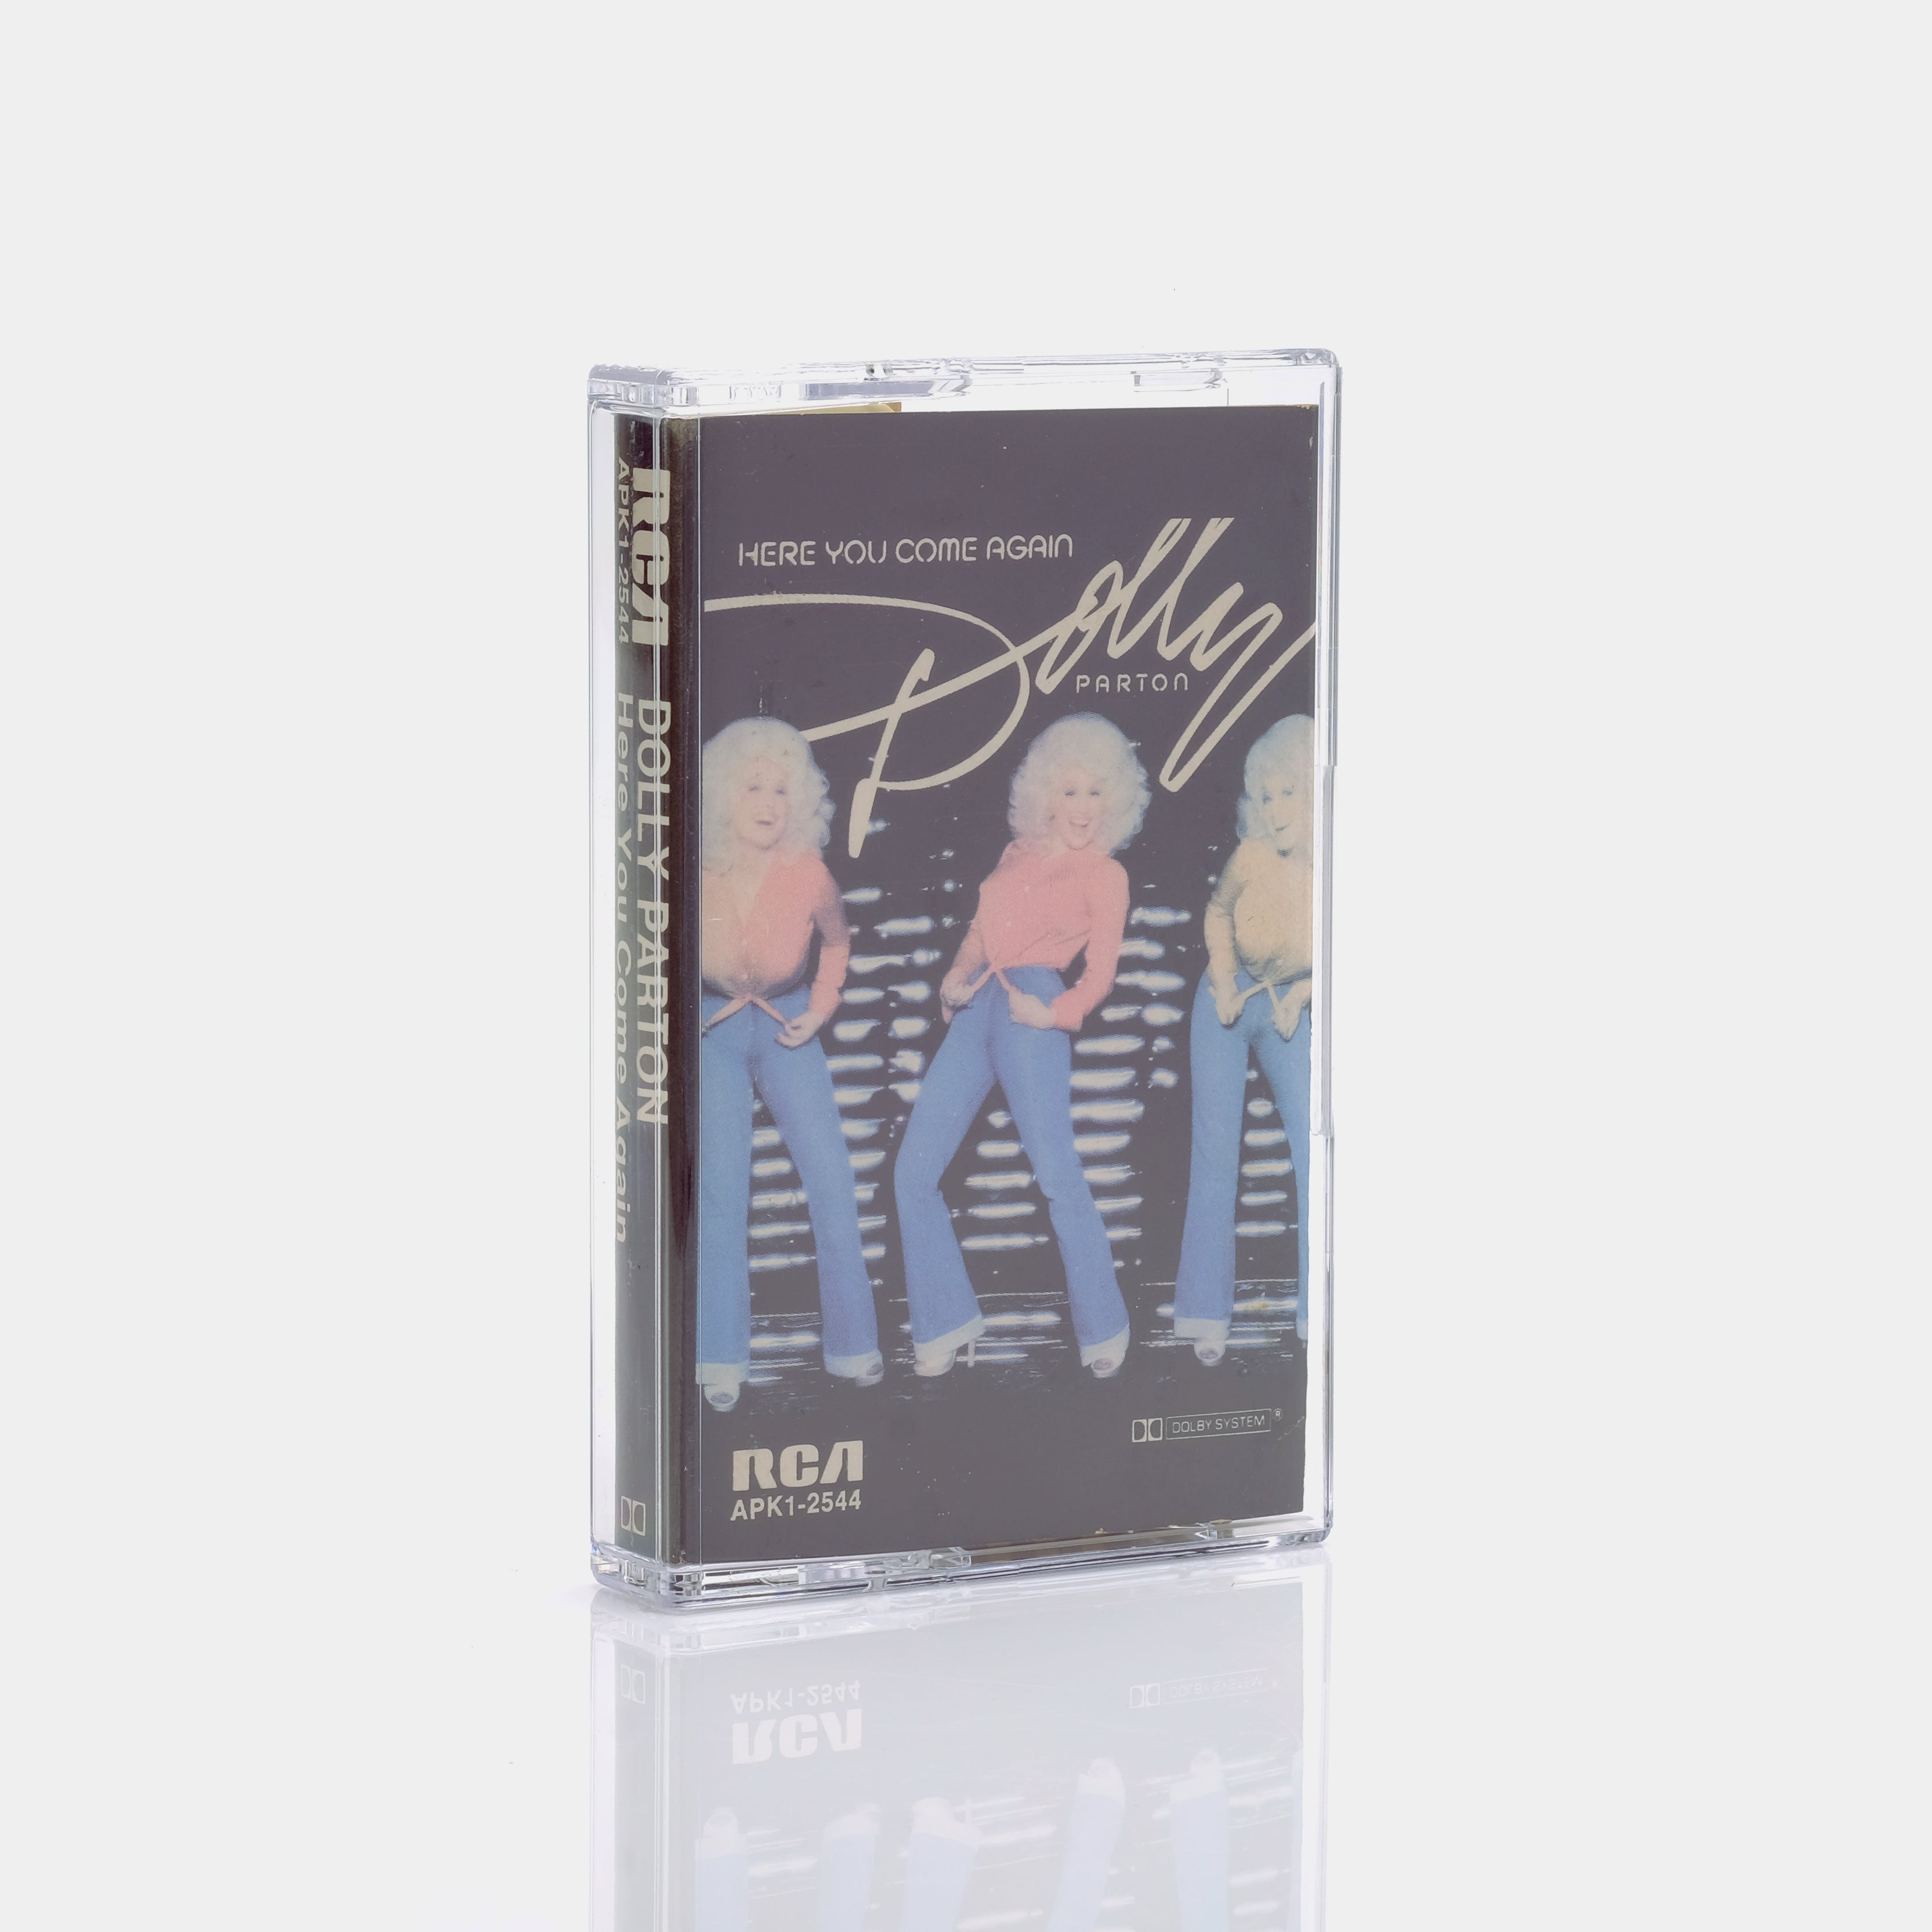 Dolly Parton - Here You Come Again Cassette Tape